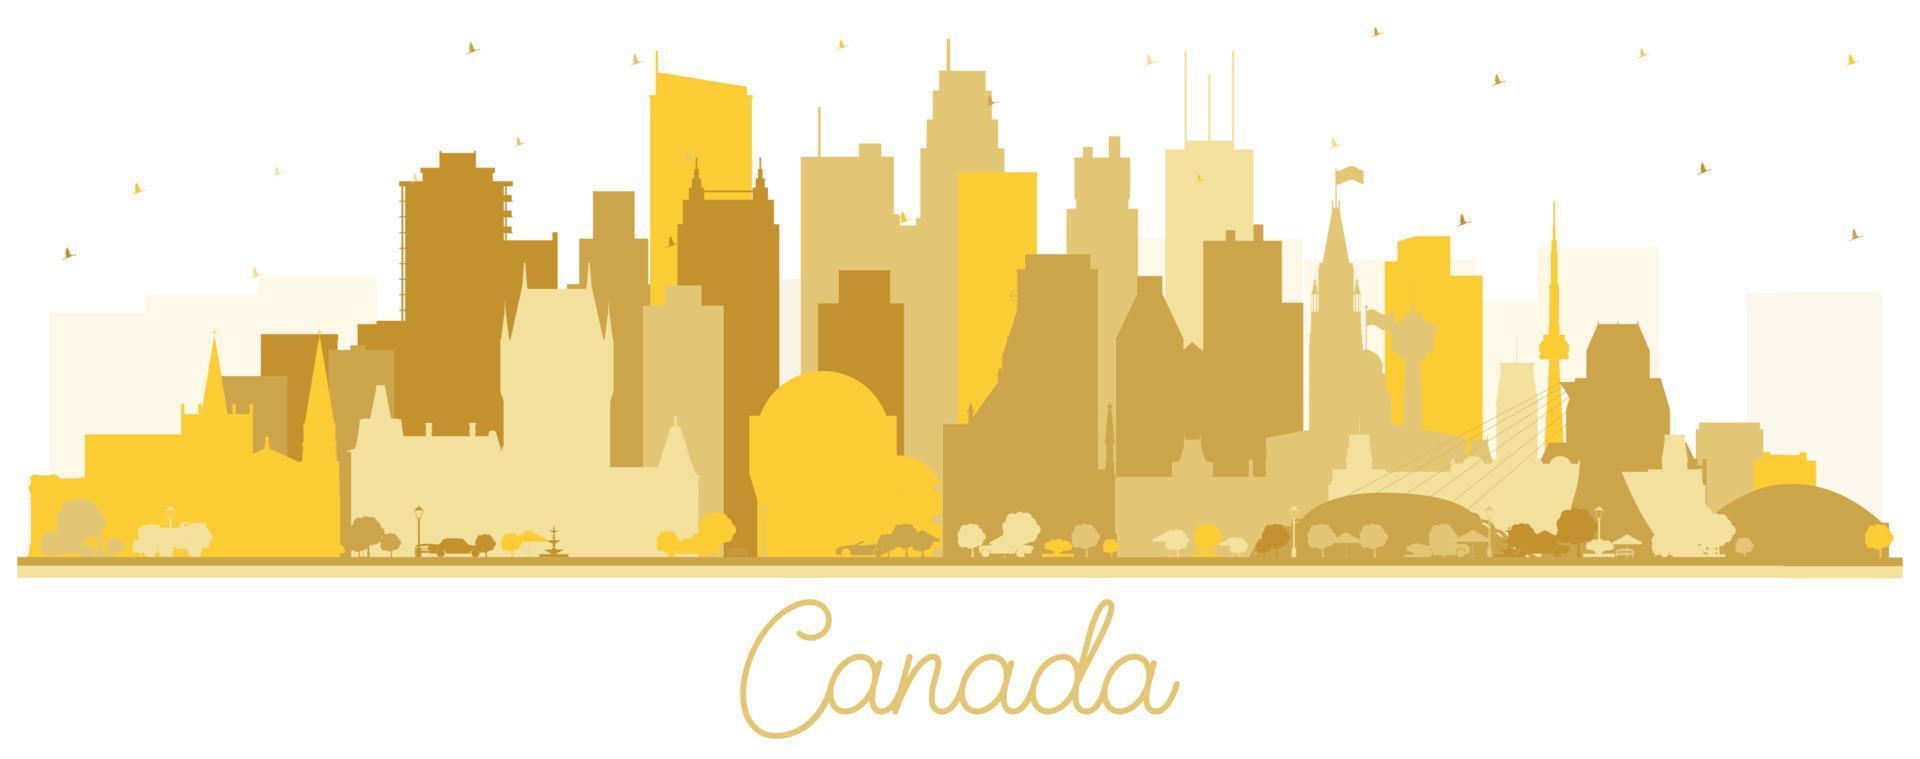 Canada City Skyline Silhouette with Golden Buildings Isolated on White. vector